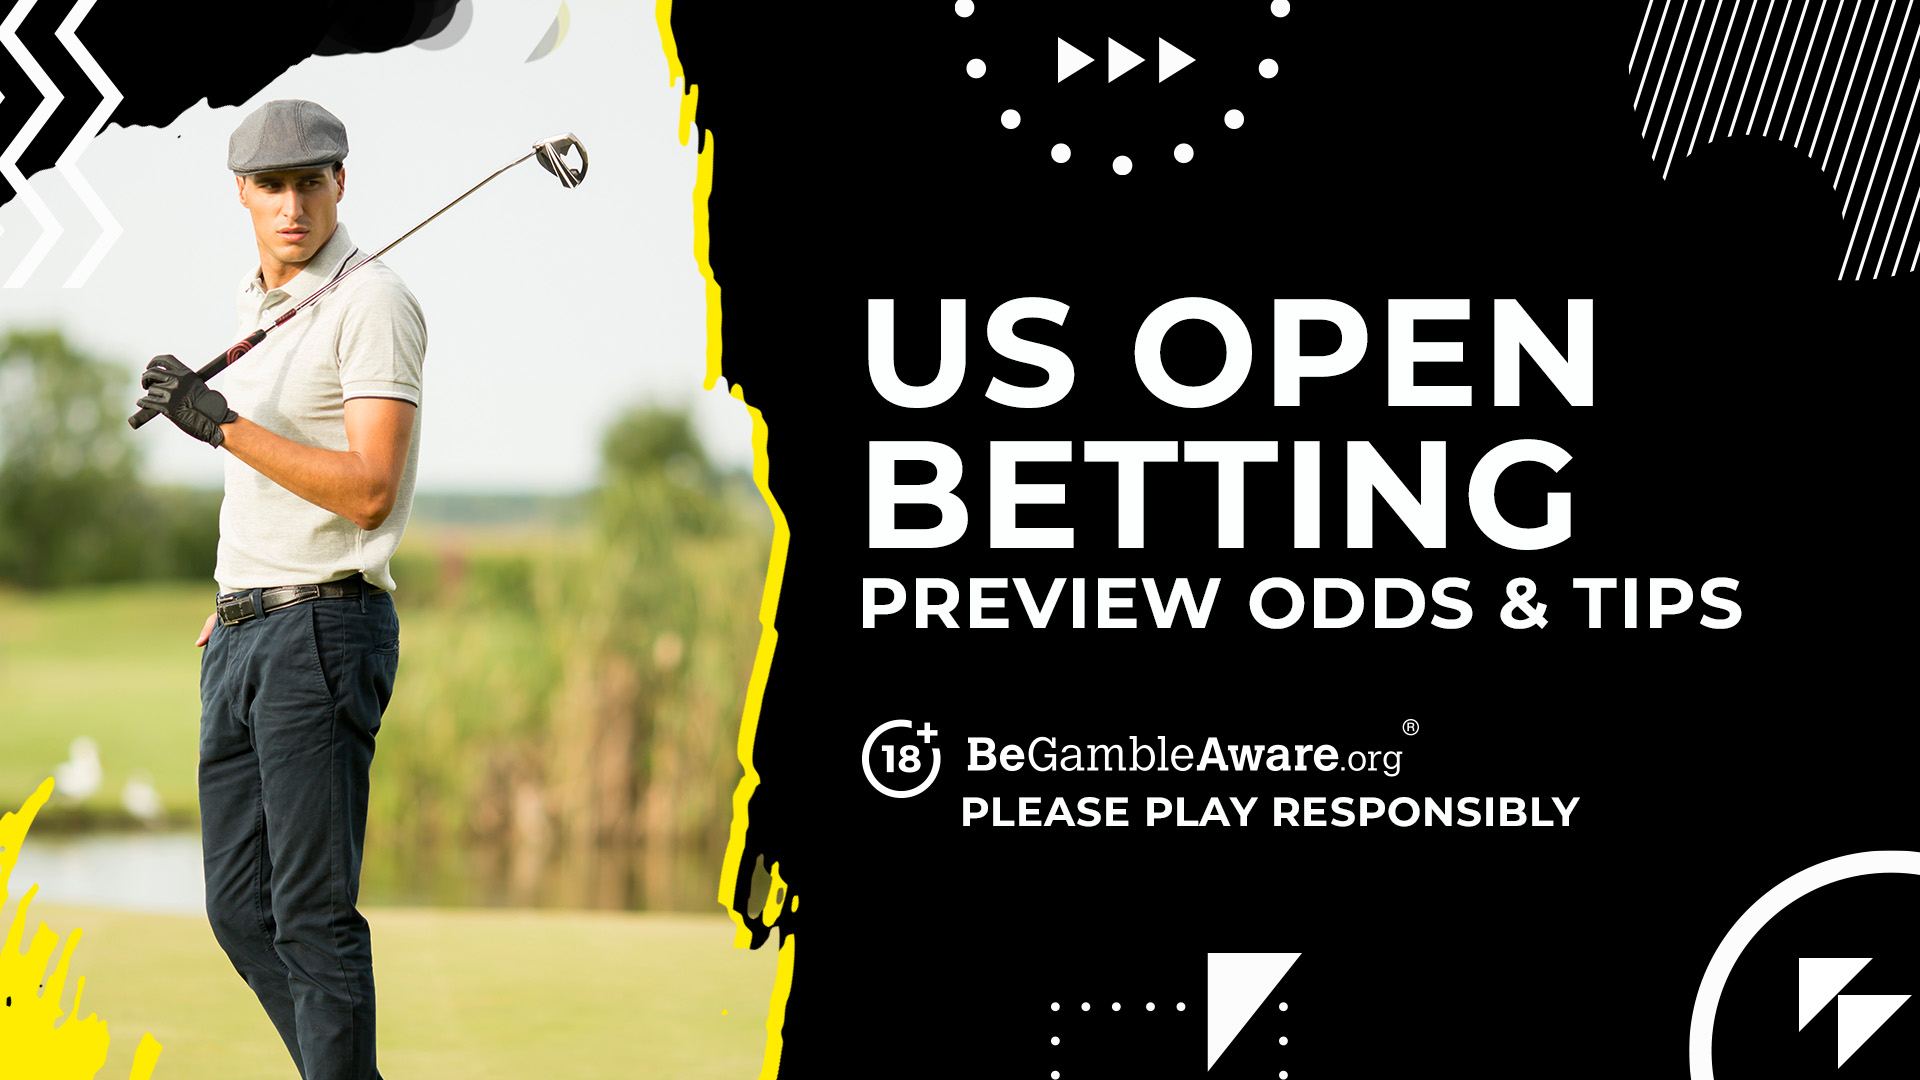 Photo: open golf betting preview